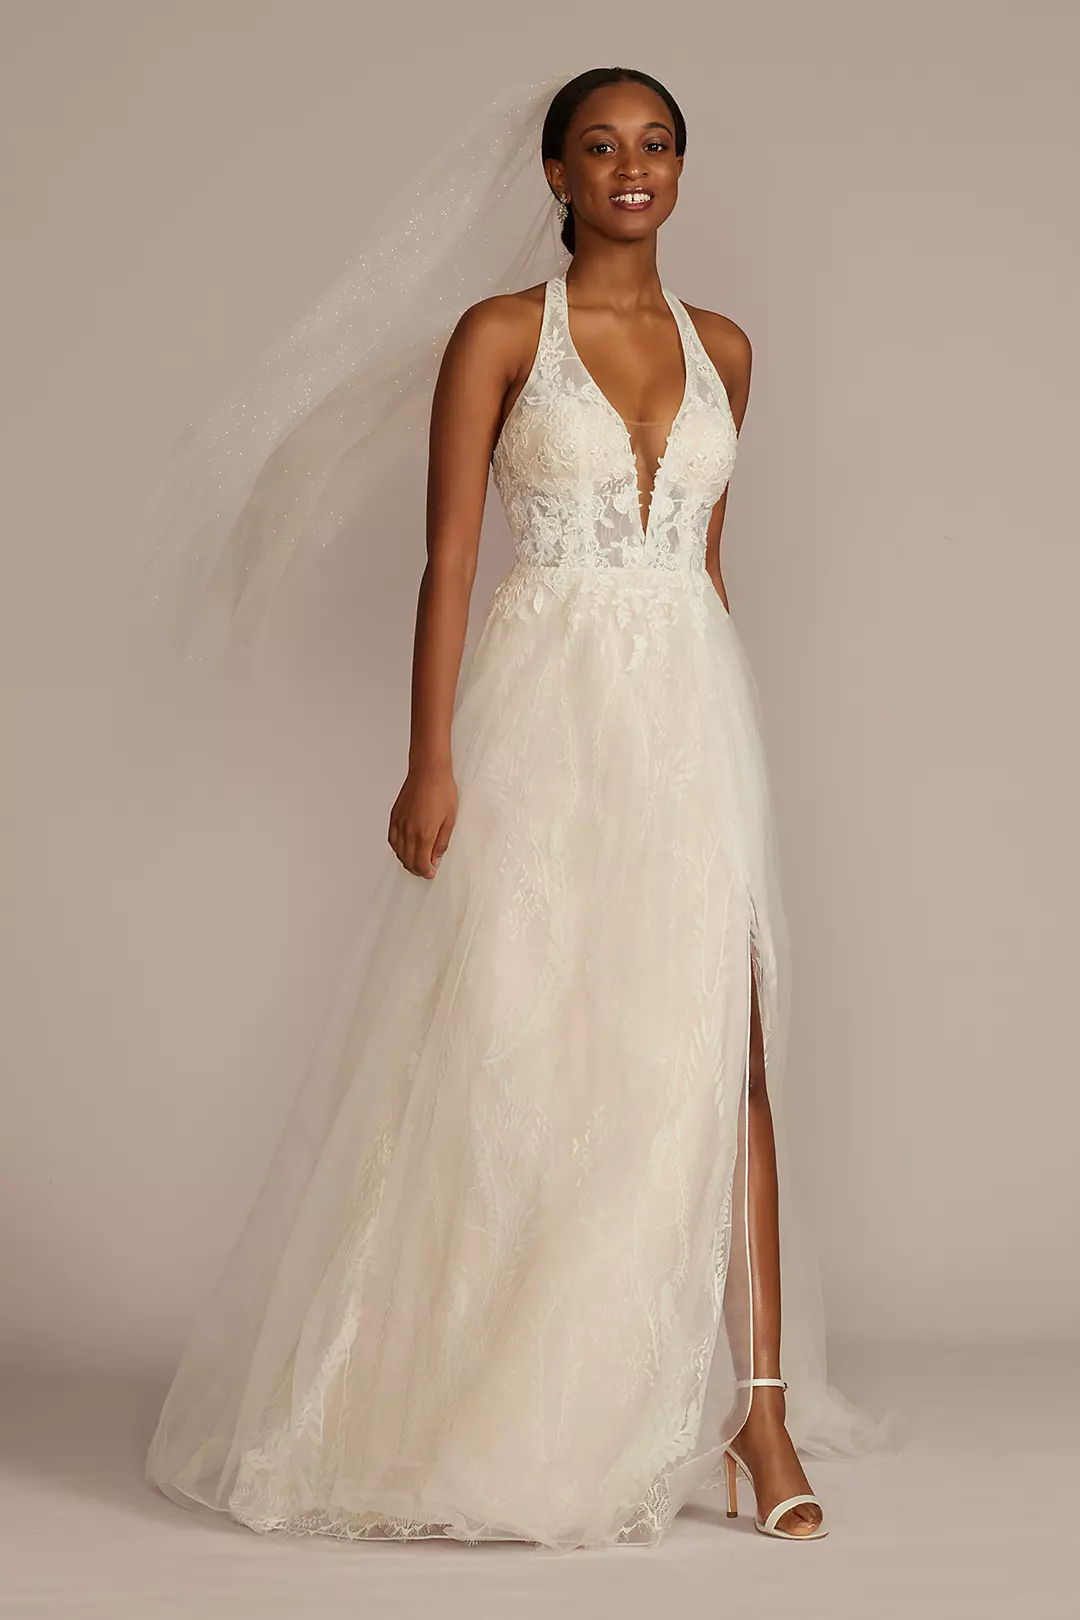 Halter Neckline Lace Bridal Gown With Crisscross Back – TulleLux